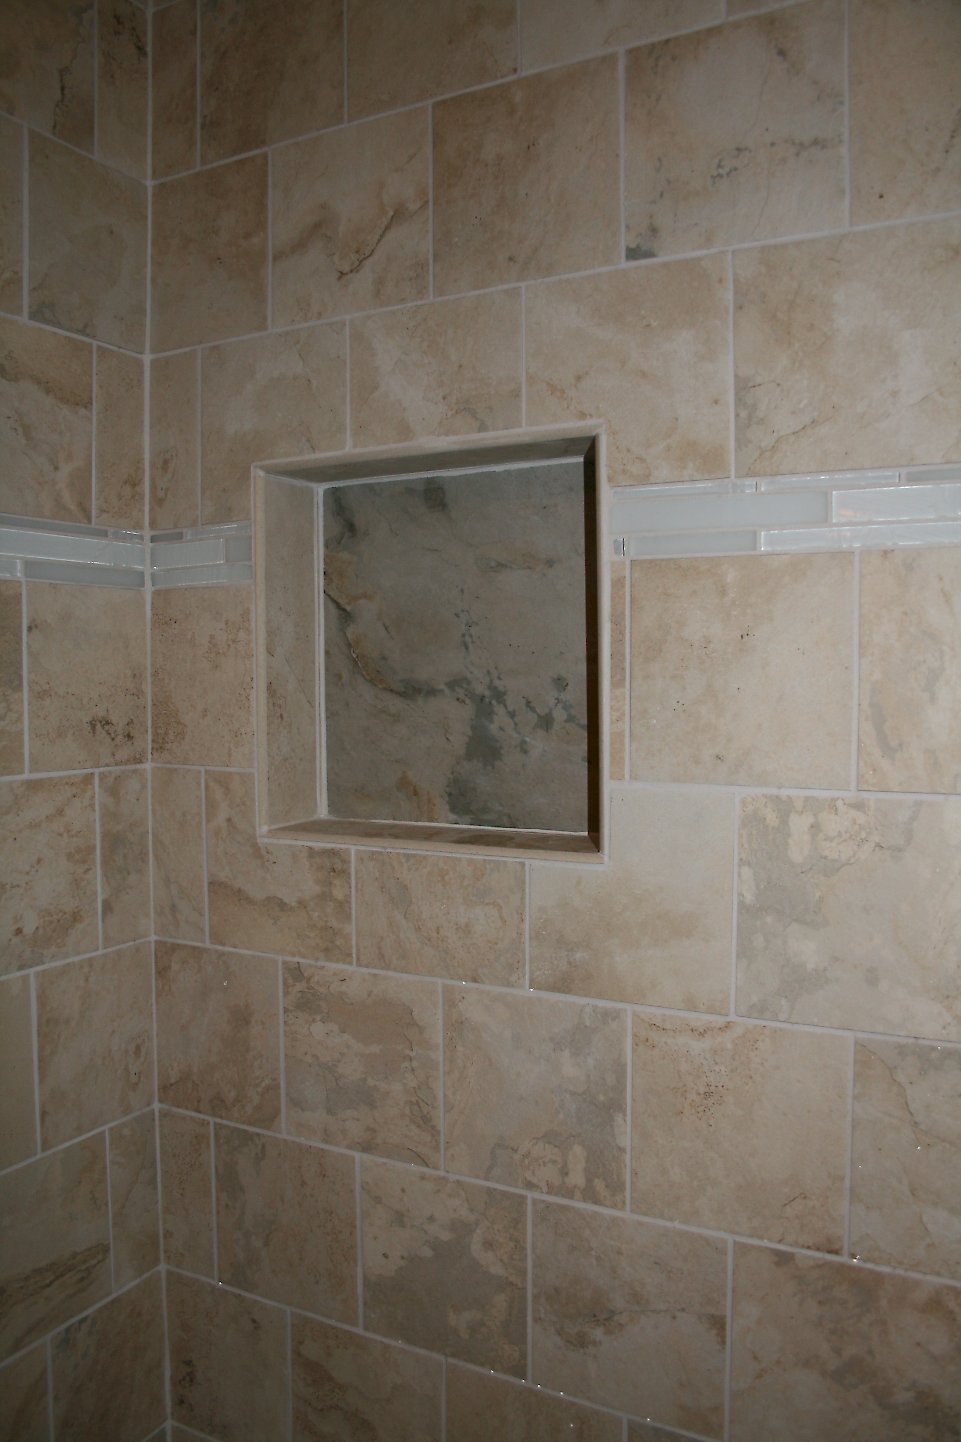 Recessed shelf in the shower wall.